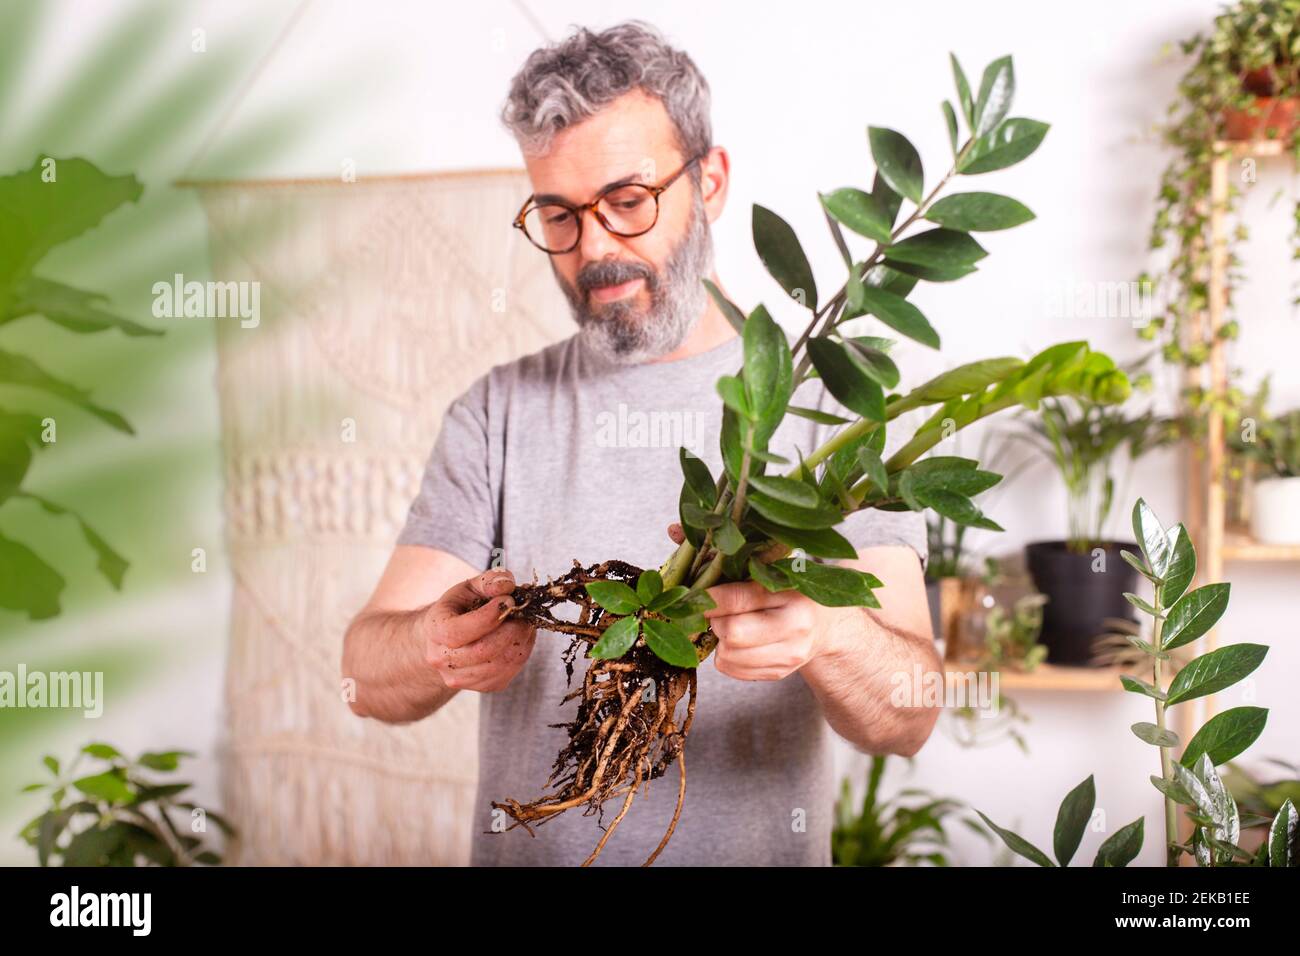 Mature man wearing eyeglasses checking roots of Zamioculcas Zamiifolia plant while gardening at home Stock Photo